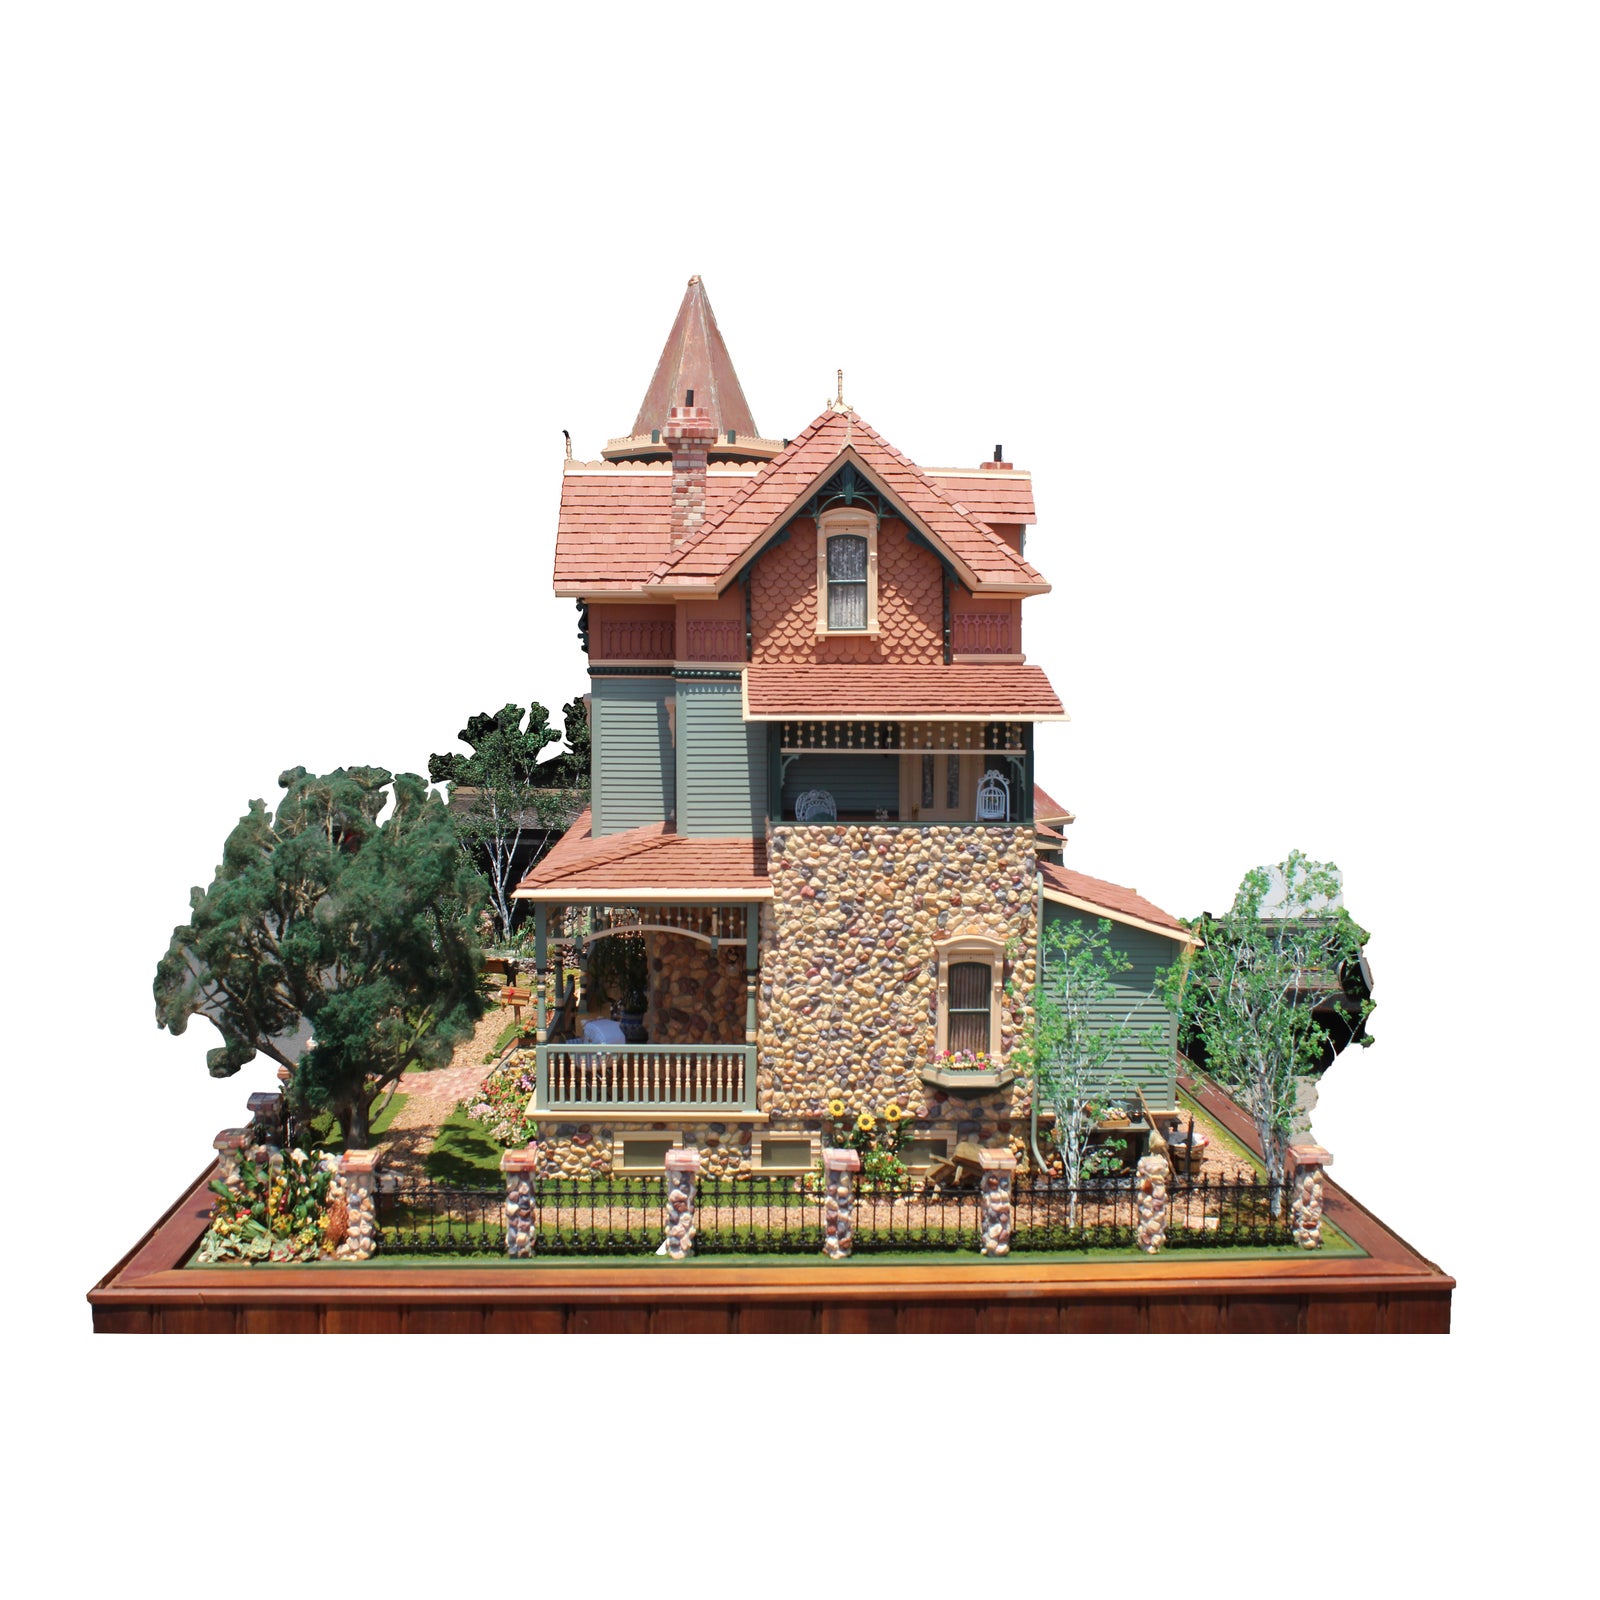 heritage-museum-la-on-s-calif-architecture-victorian-doll-house-and-case-7169